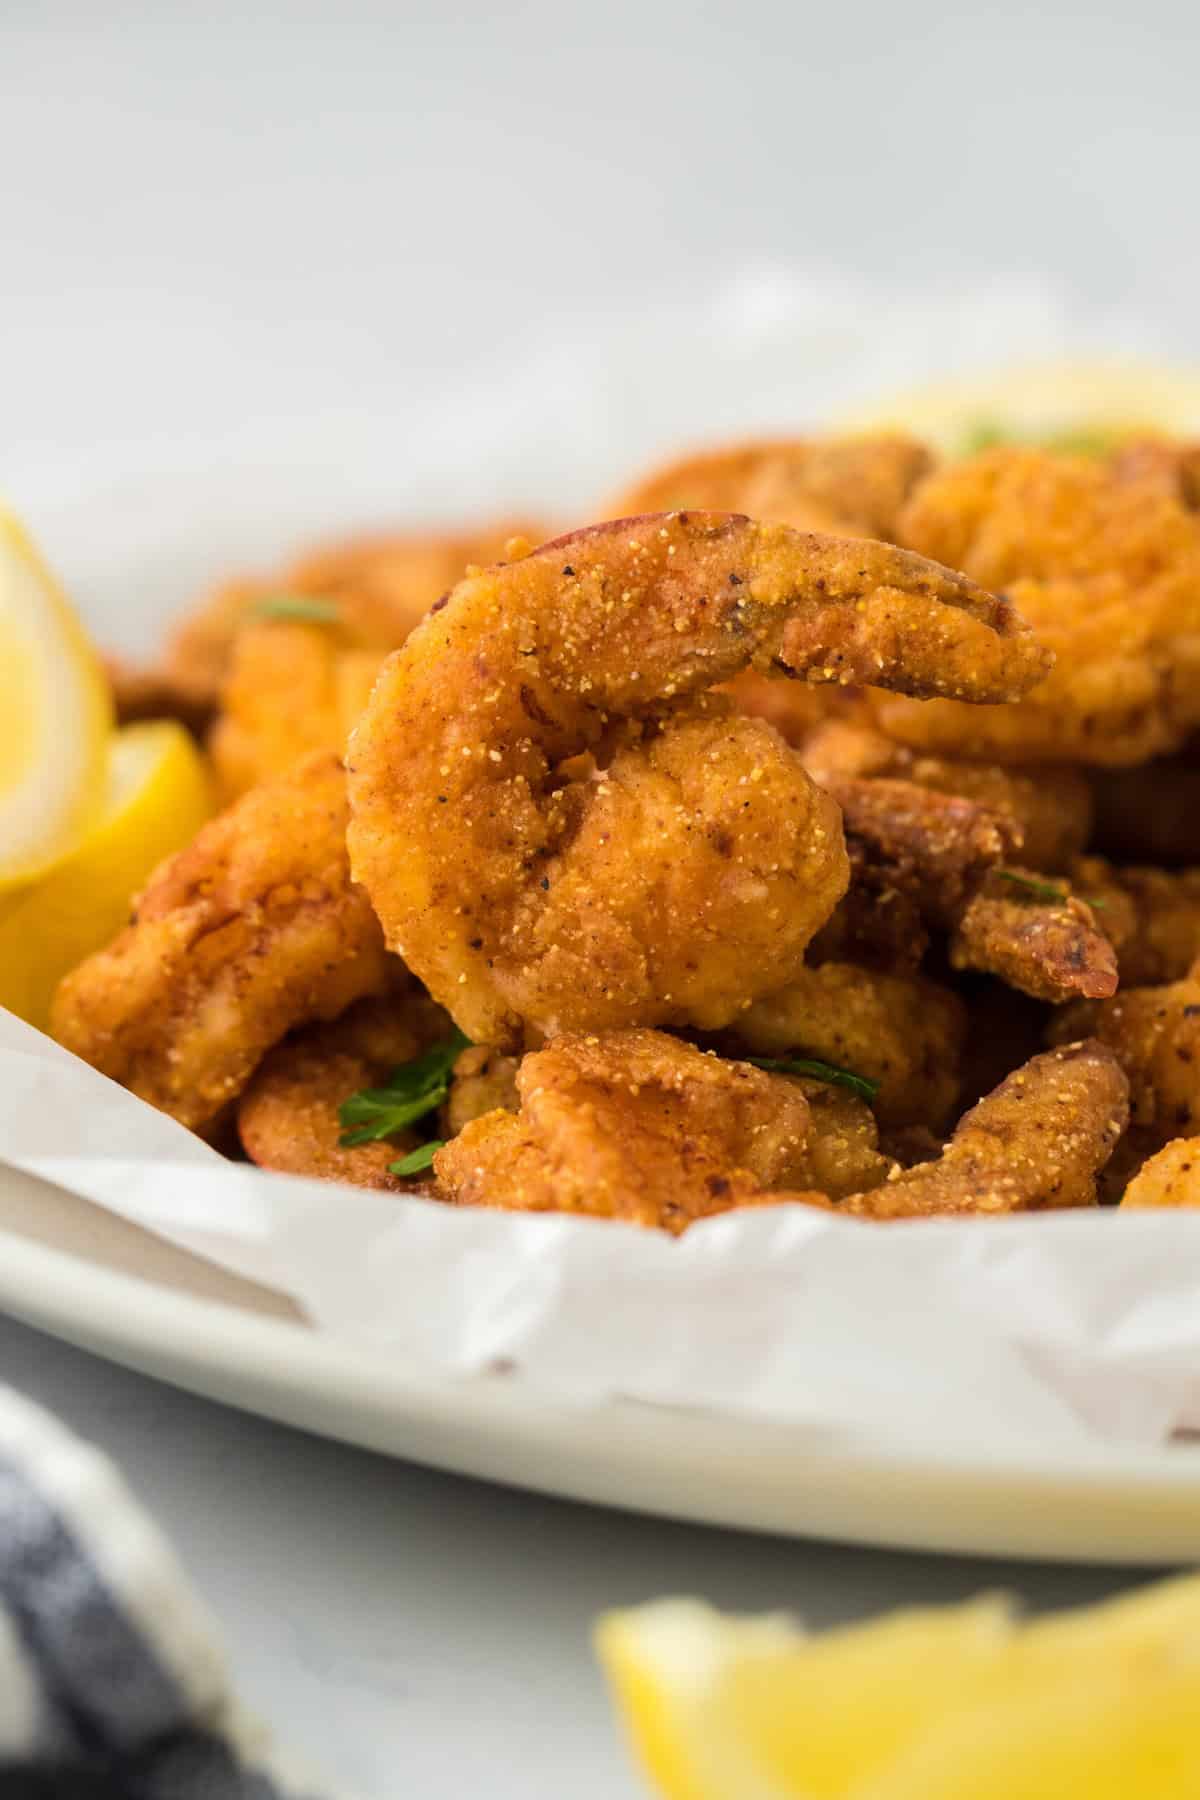 A close up of a fried shrimp recipe on a white plate ready to serve